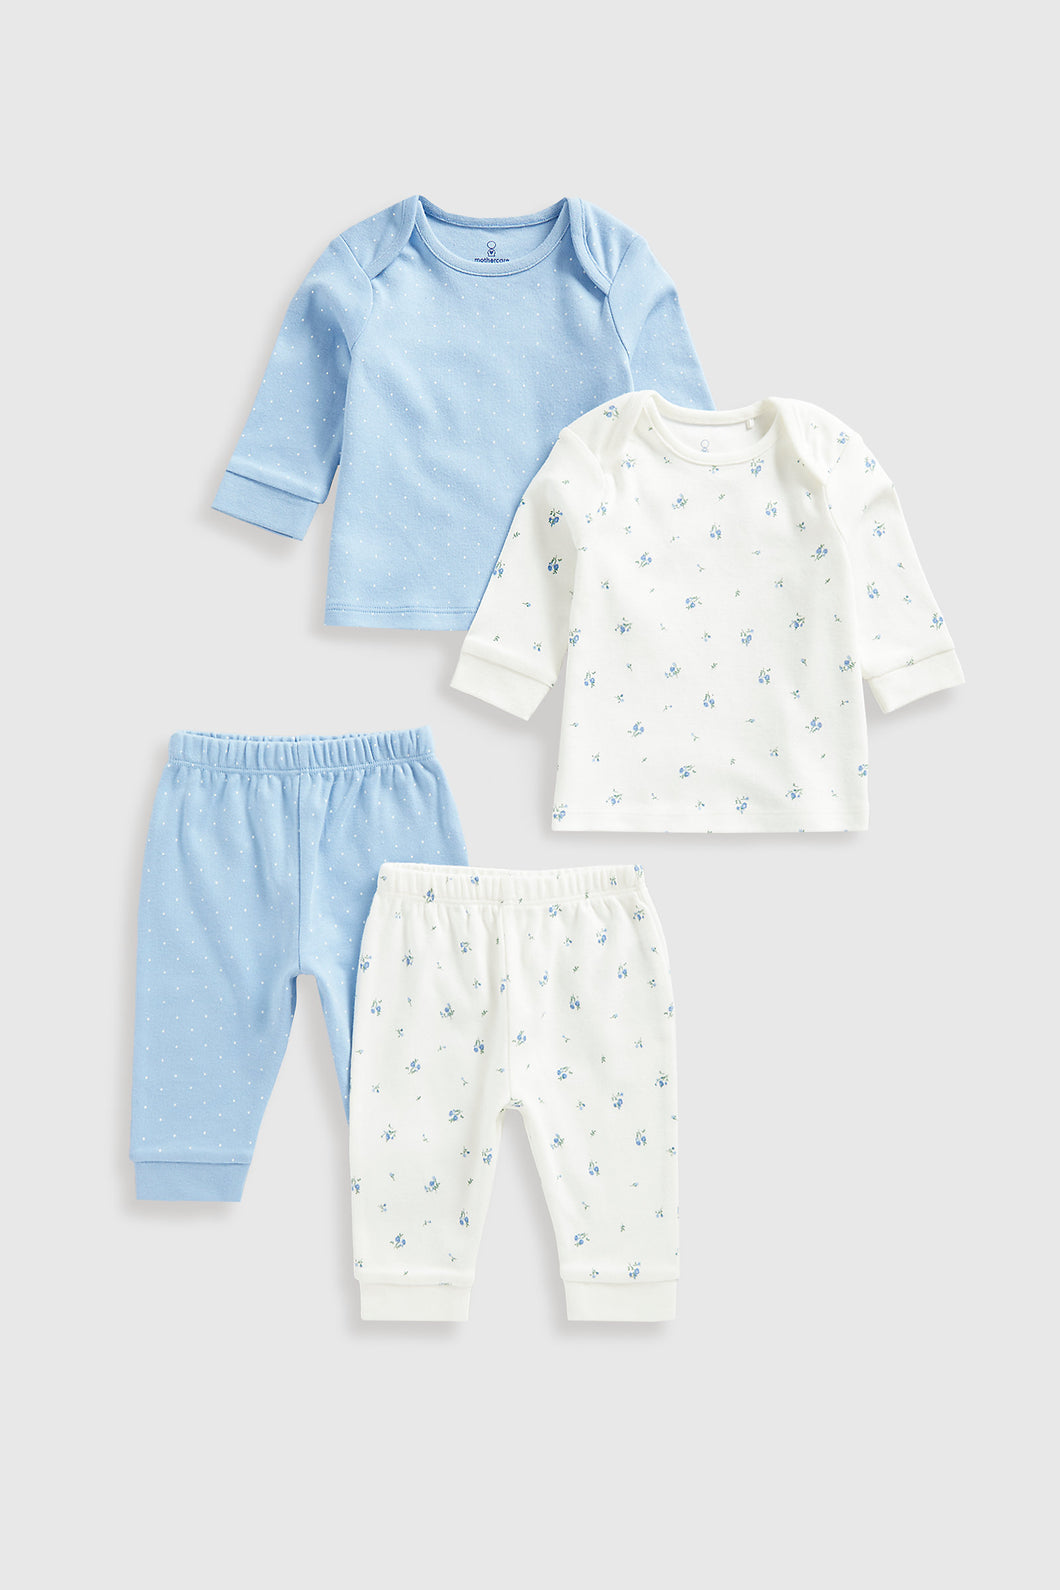 Mothercare Ditsy Baby Pyjamas - 2 Pack